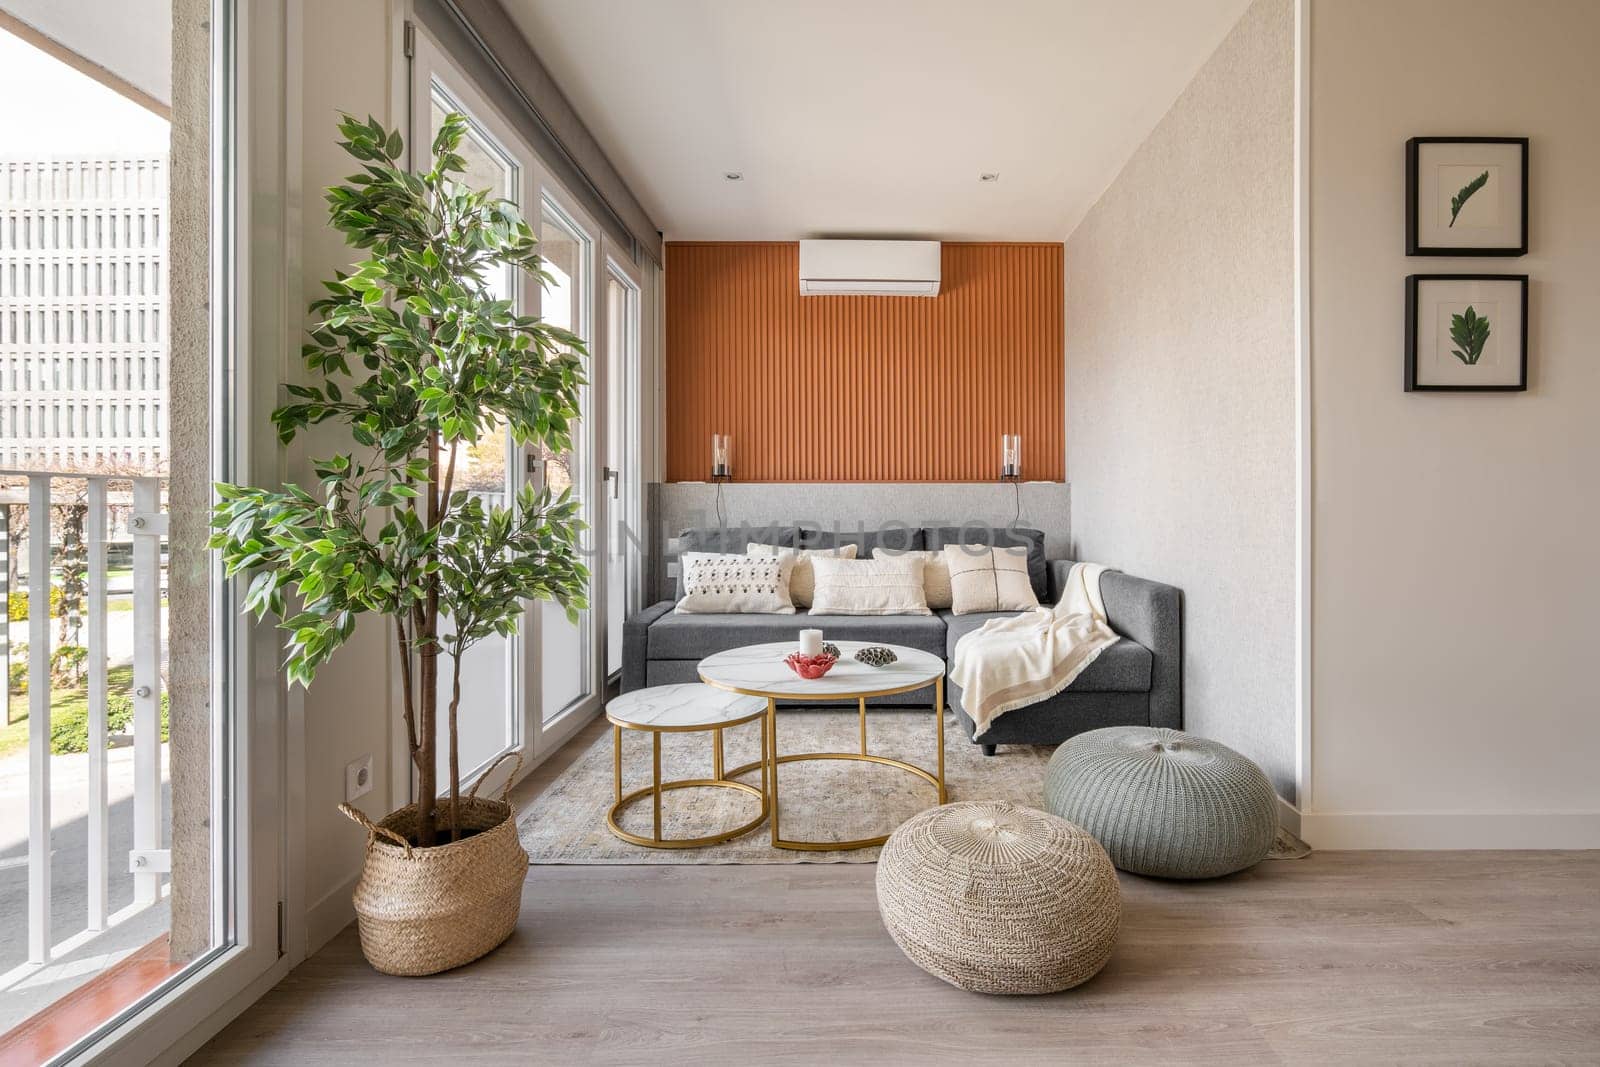 Stylish seating area with a terracotta color wall with a sofa and pouffes near the panoramic windows in the living room. The concept of a modern Scandinavian interior.